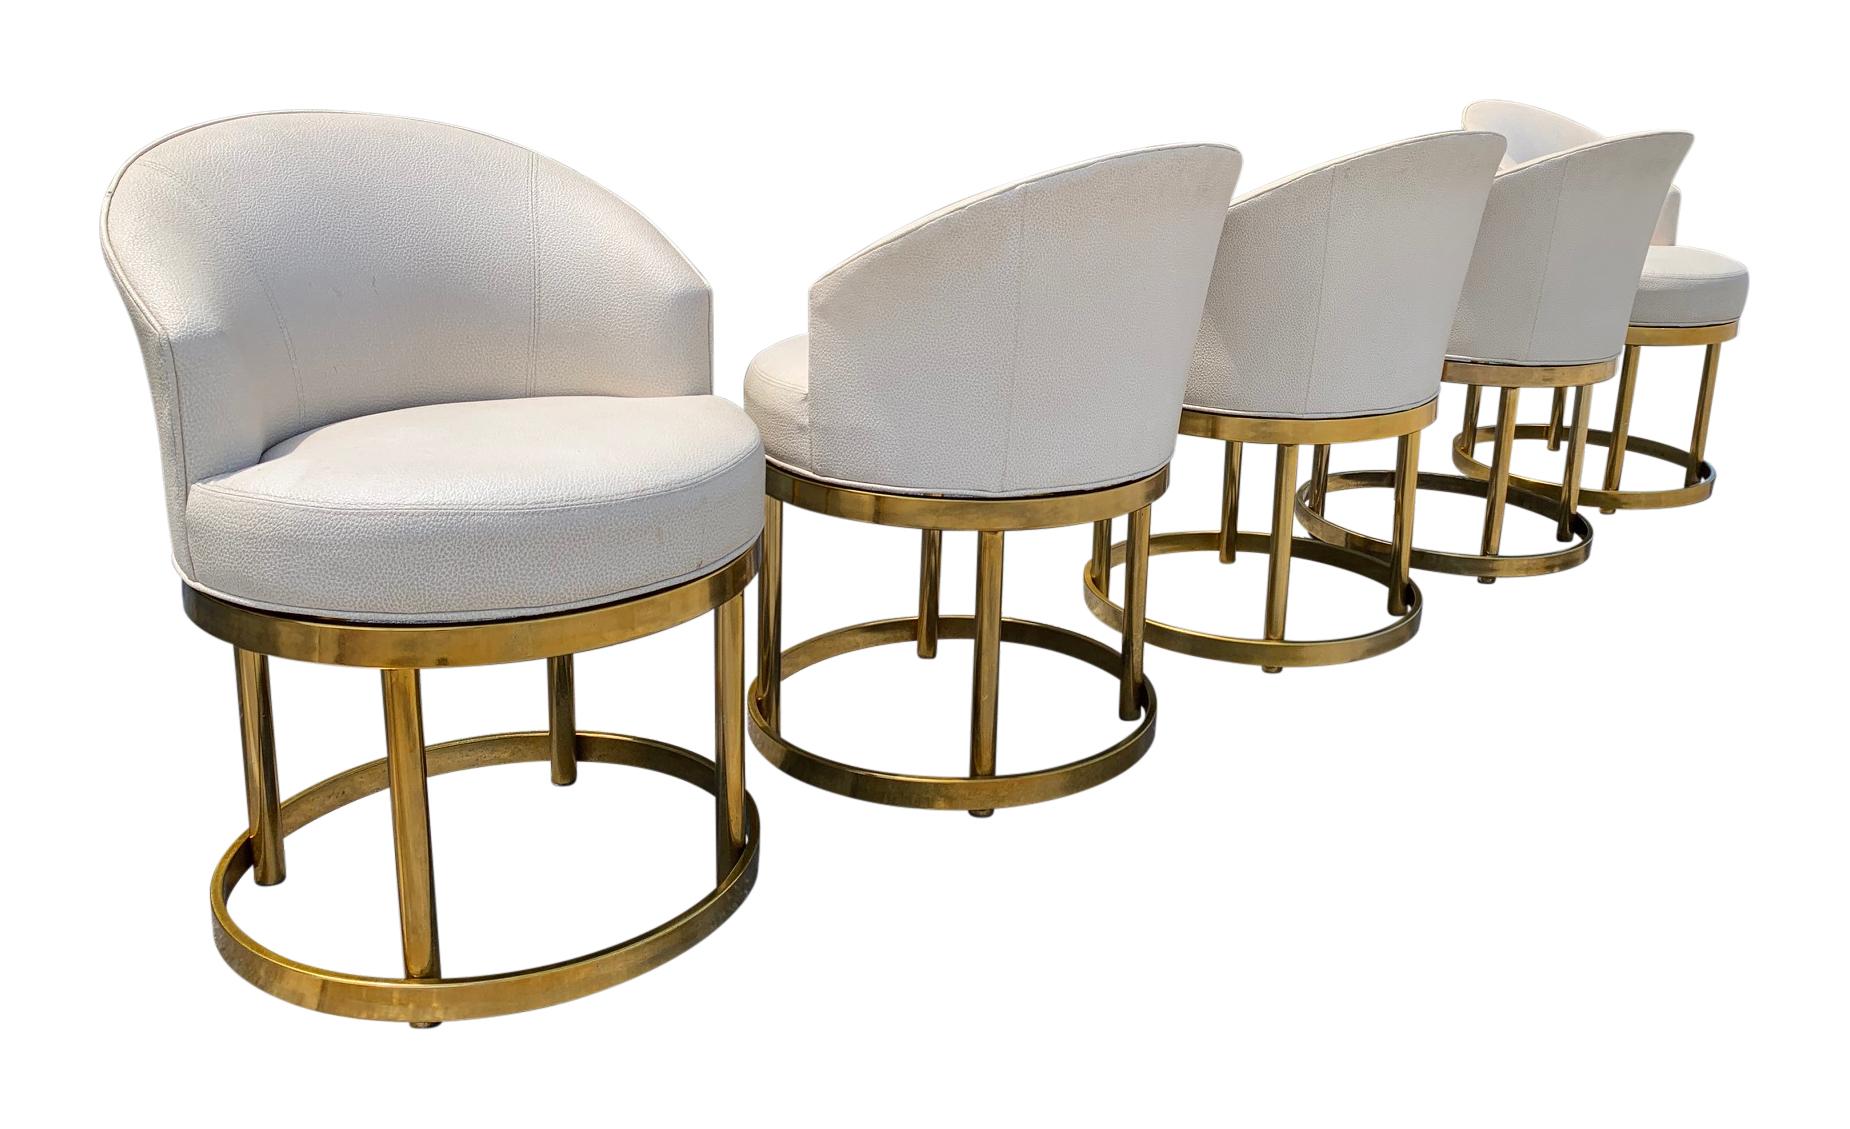 Swivel Stools on Brass Bases in the Manner of Milo Baughman 1